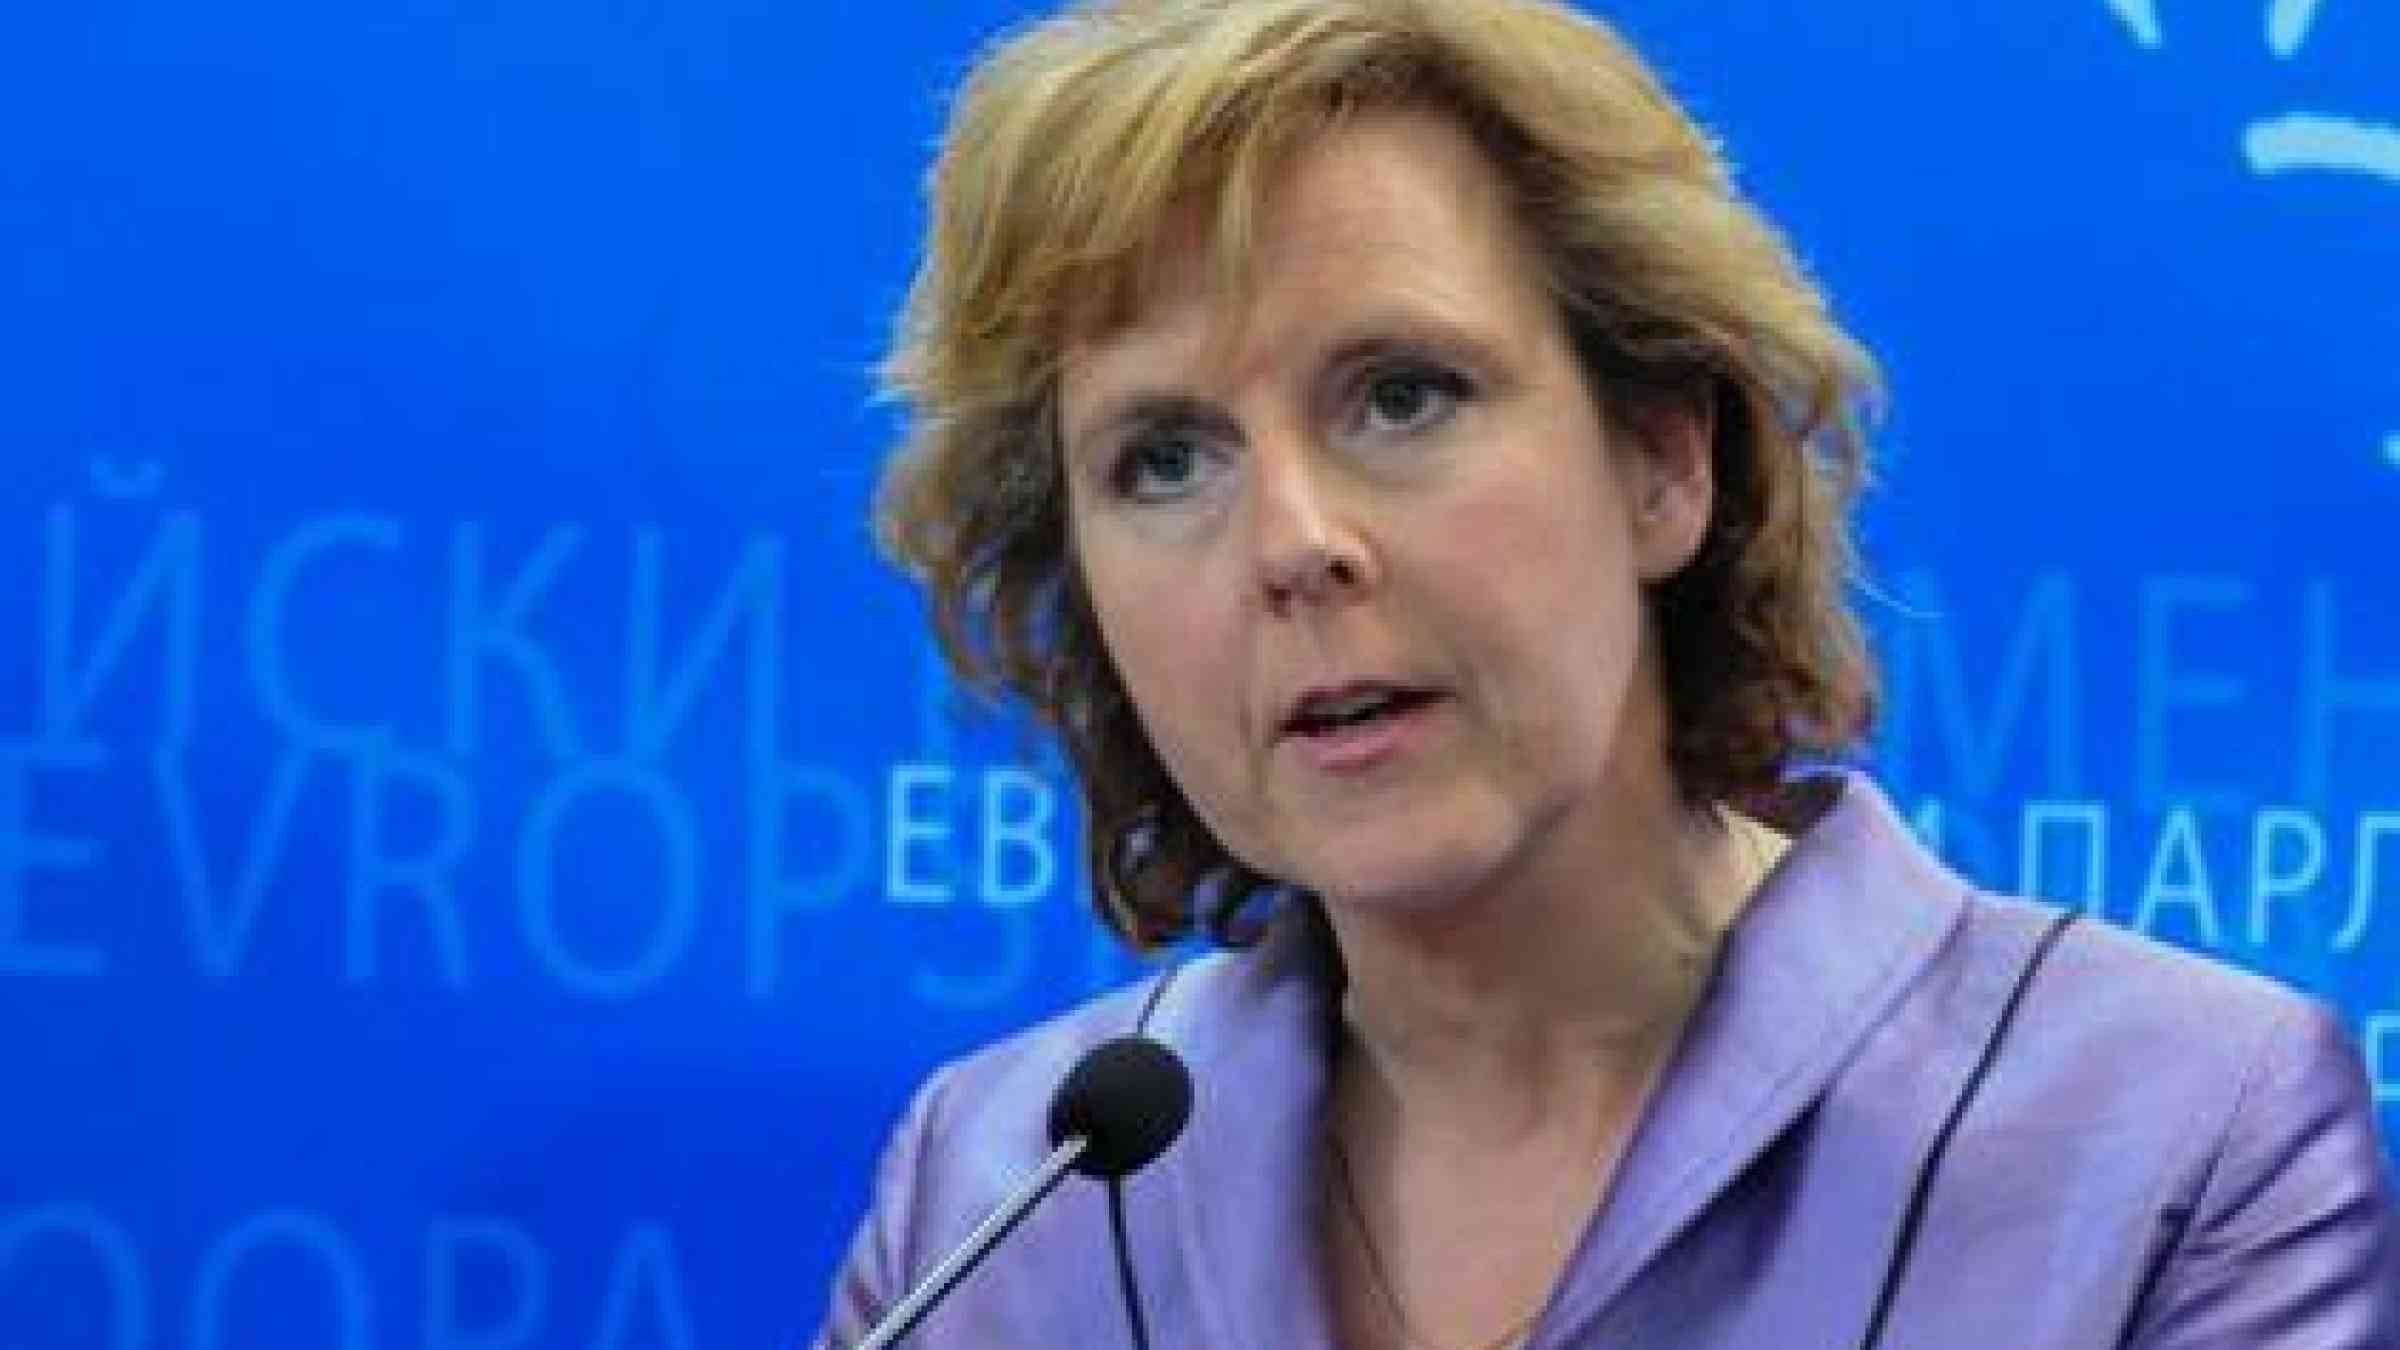 EU Climate Action Commissioner Connie Hedegaard